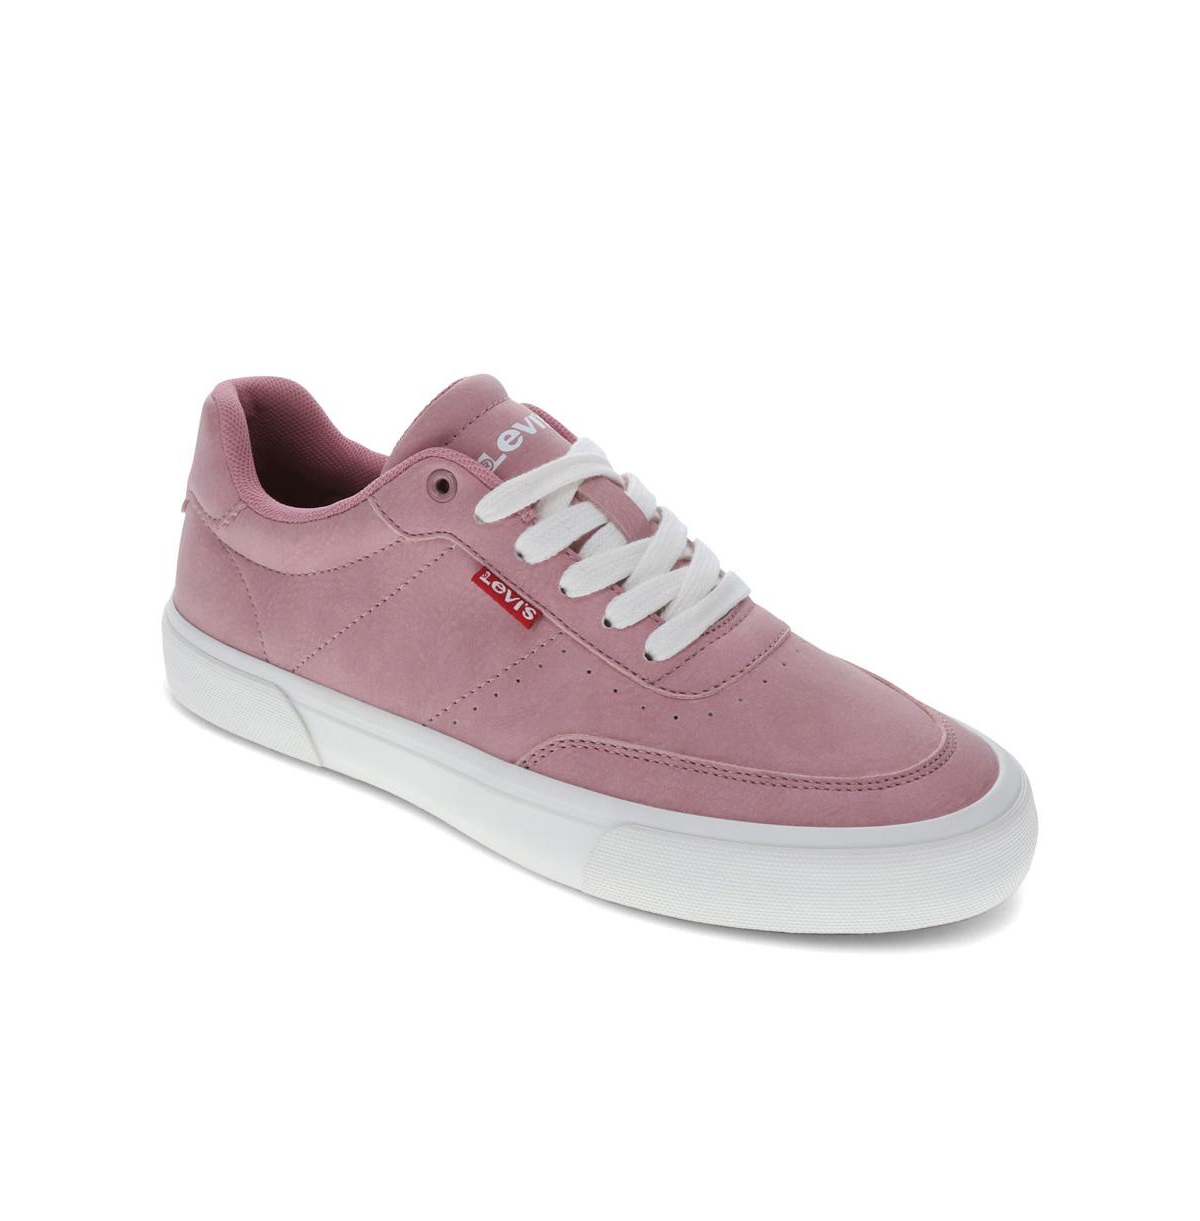 Levi's Women's Maribel Lux Synthetic Leather Low Top Casual Lace Up Sneaker Shoe In Rose